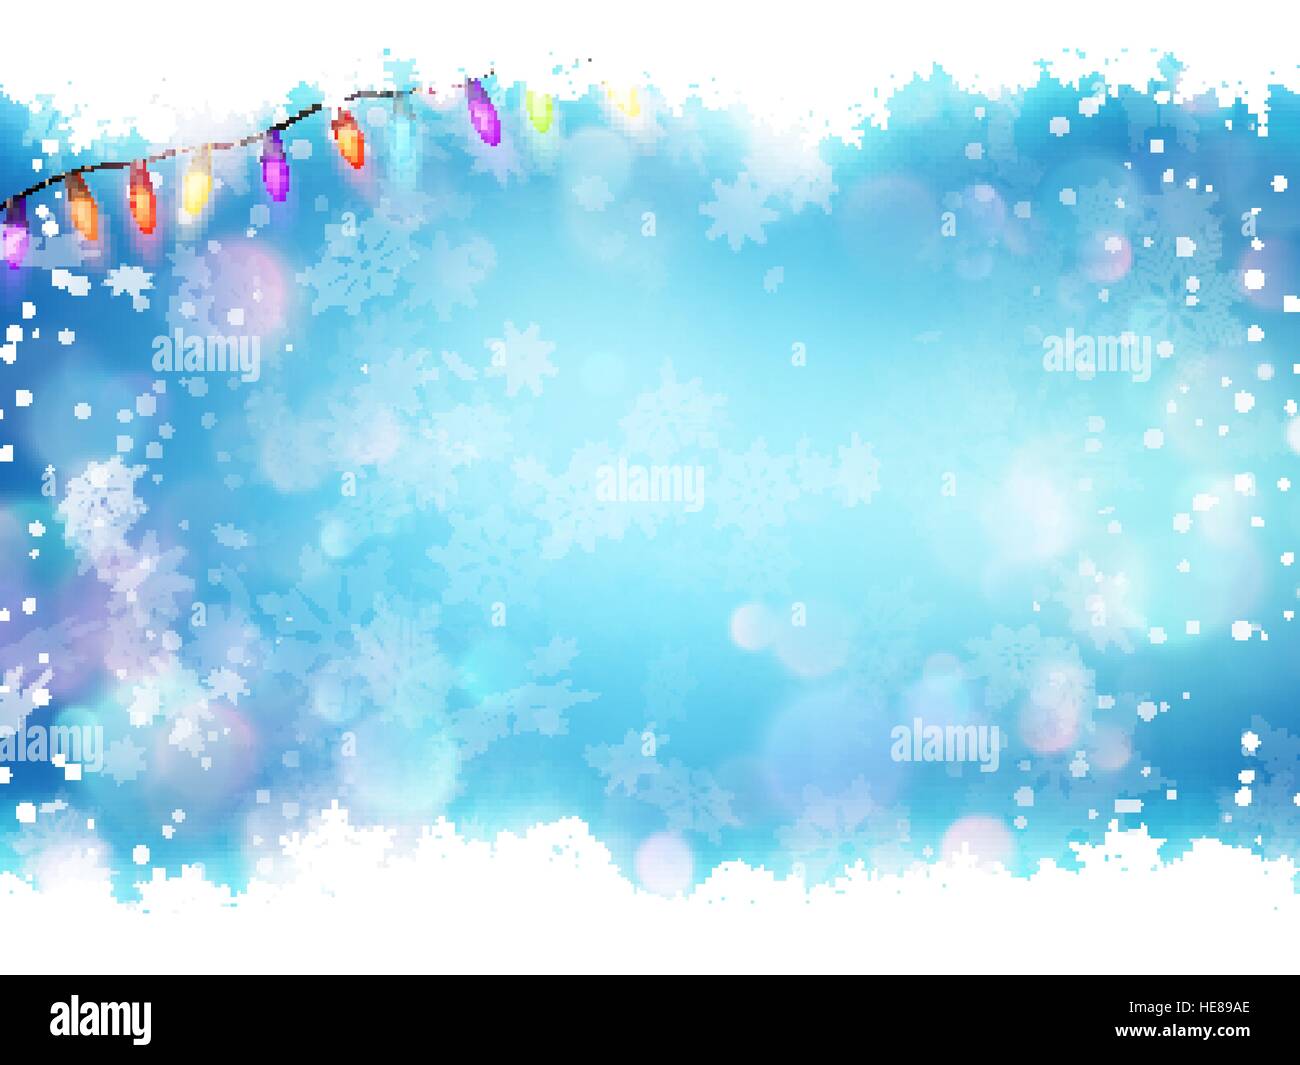 Flying snowflakes on a blue background. EPS 10 Stock Vector